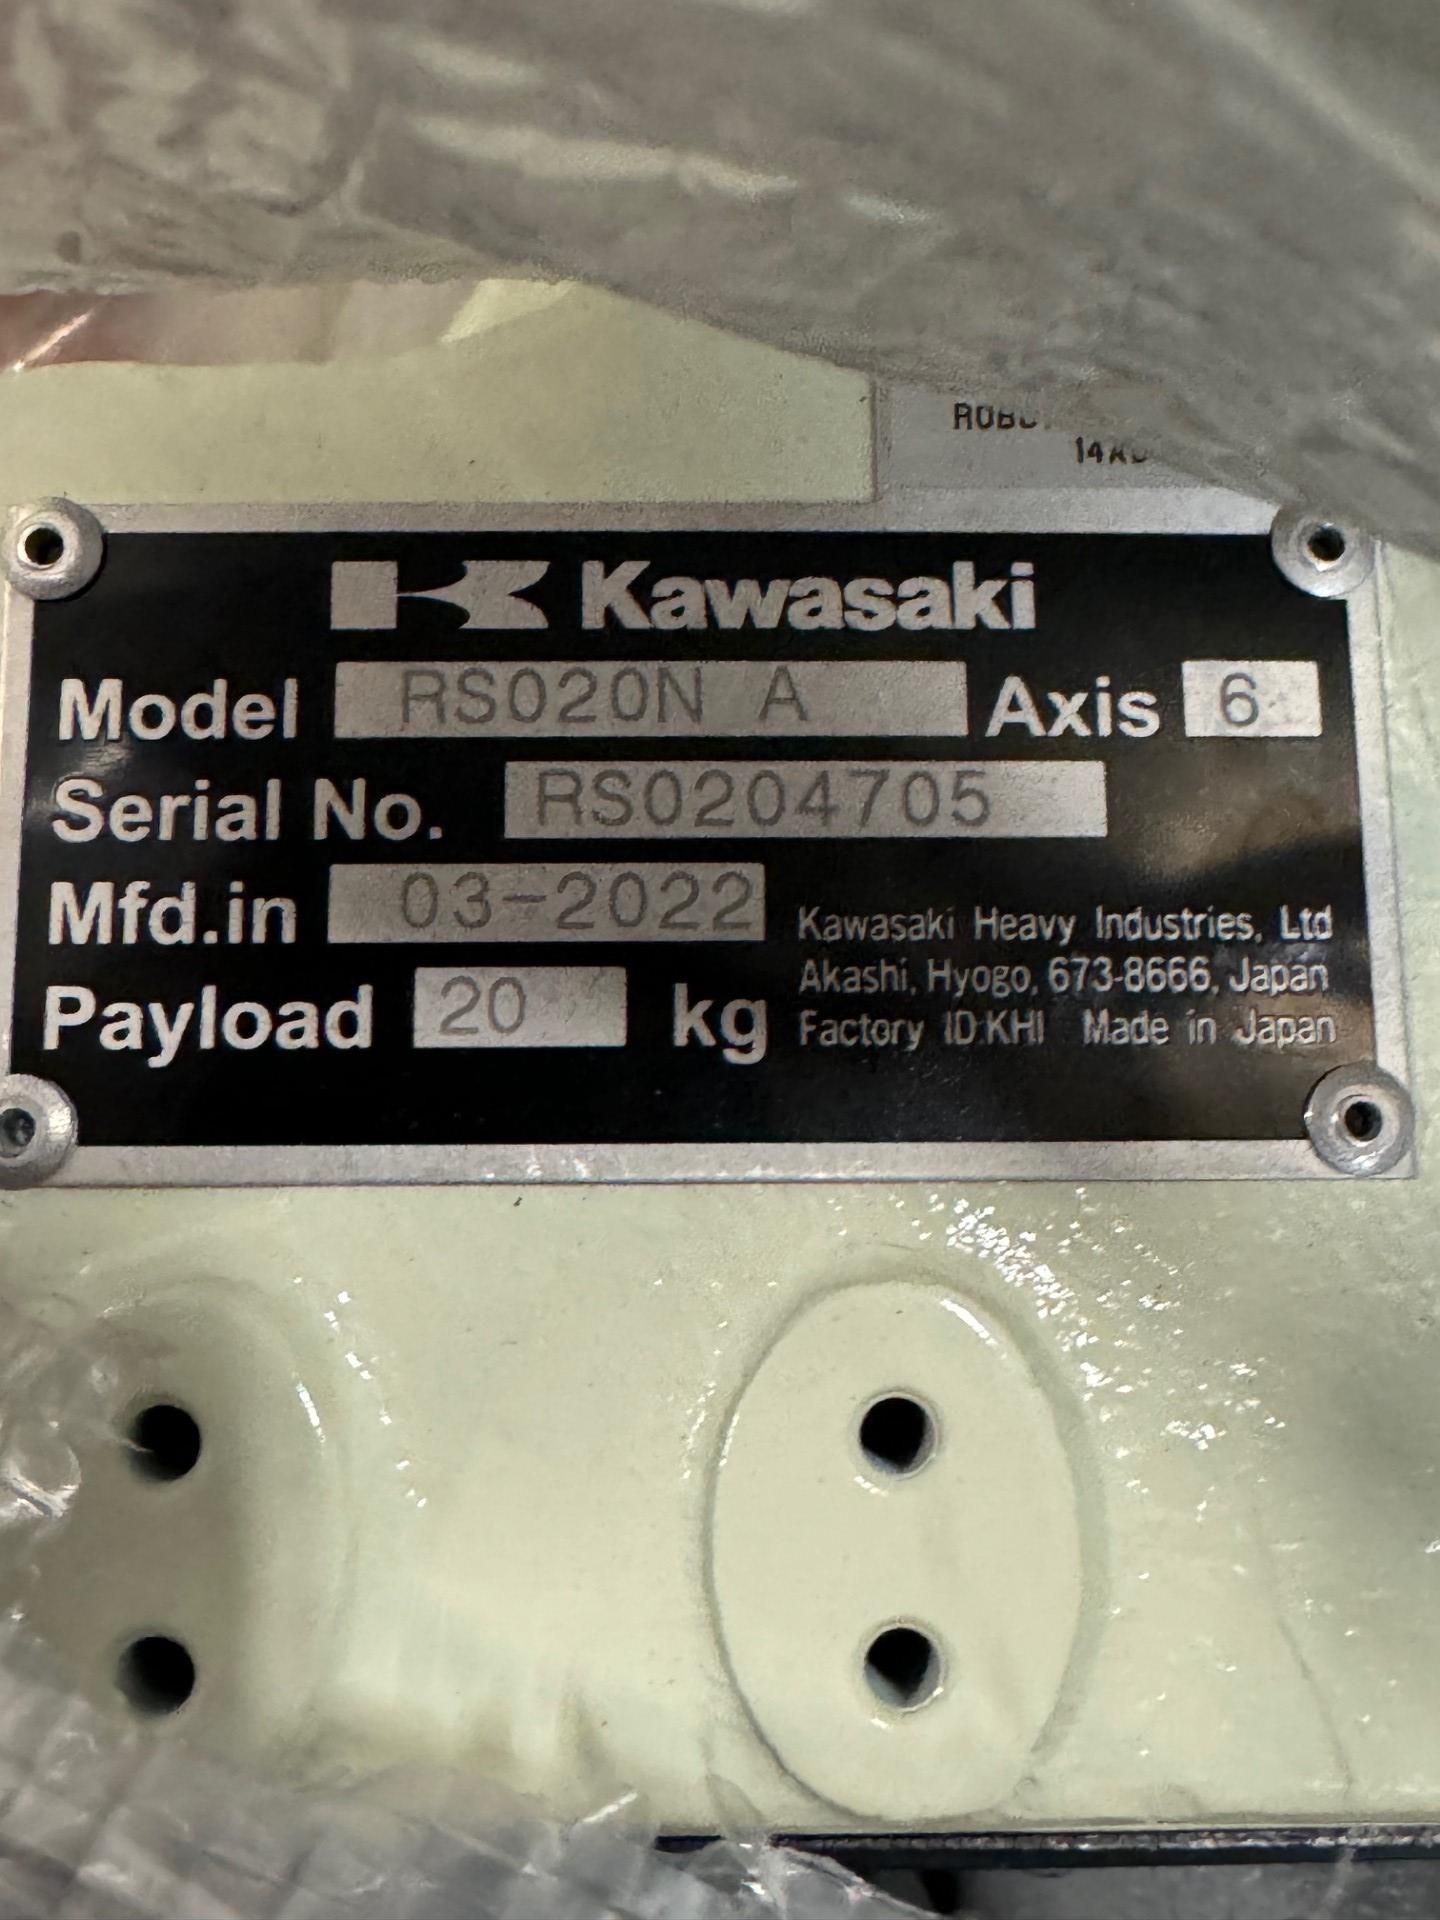 NEW KAWASAKI ROBOT MODEL RS020N, SN 4705, 20KG X 1725MM REACH WITH EO1 CONTROLS, CABLES & TEACH - Image 7 of 7